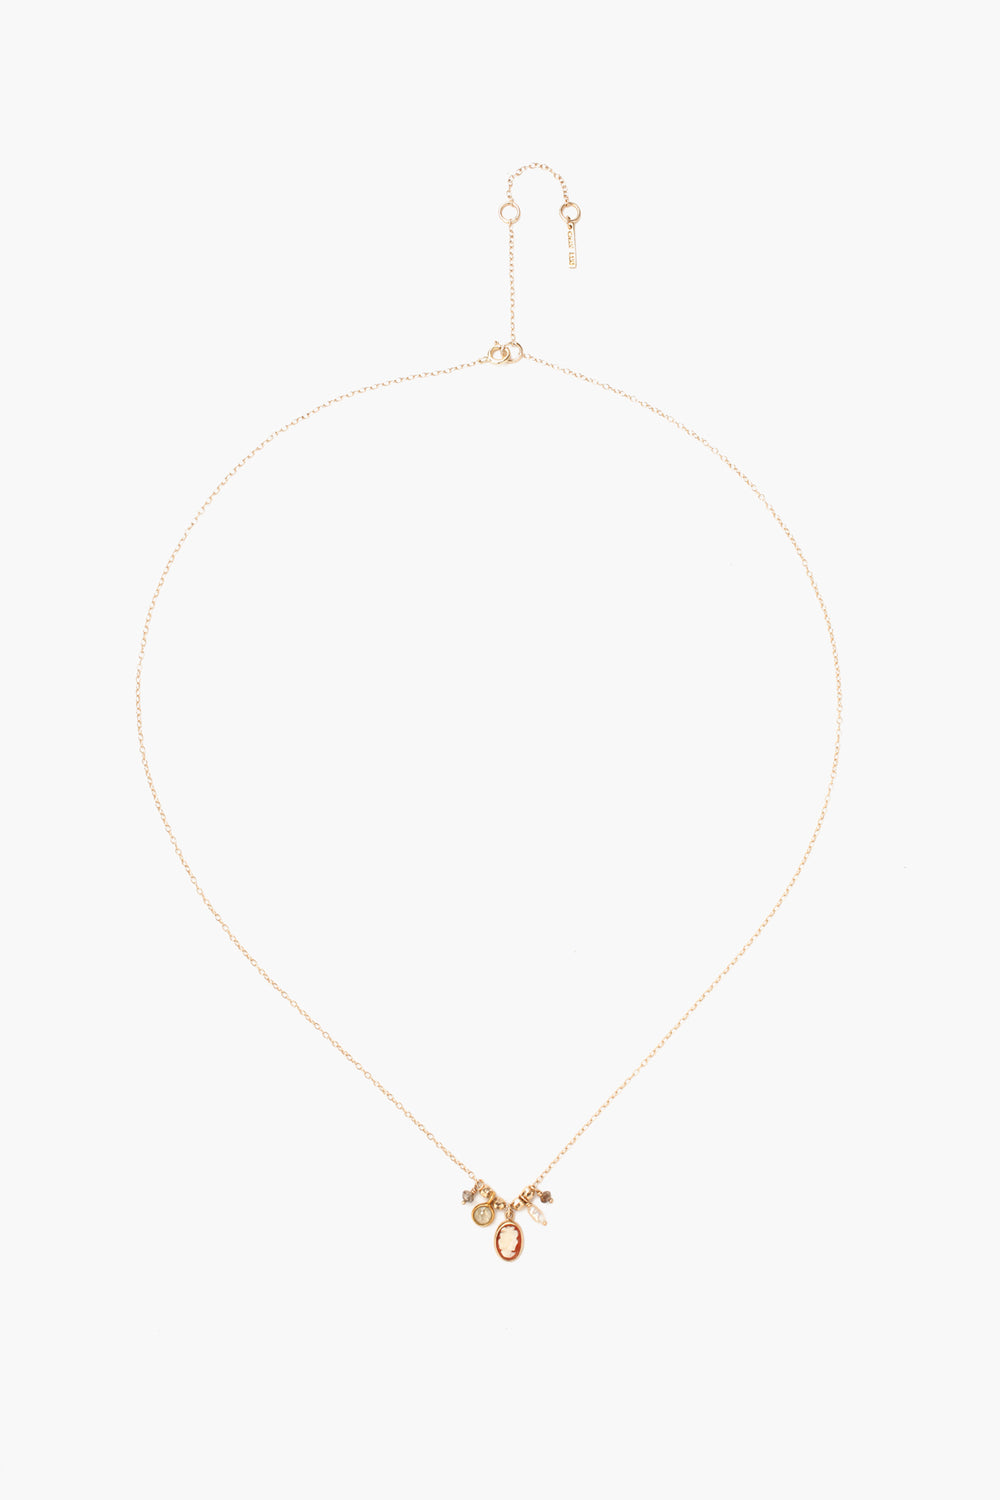 YELLOW GOLD MIX STONE PENDANT NECKLACE - Kingfisher Road - Online Boutique